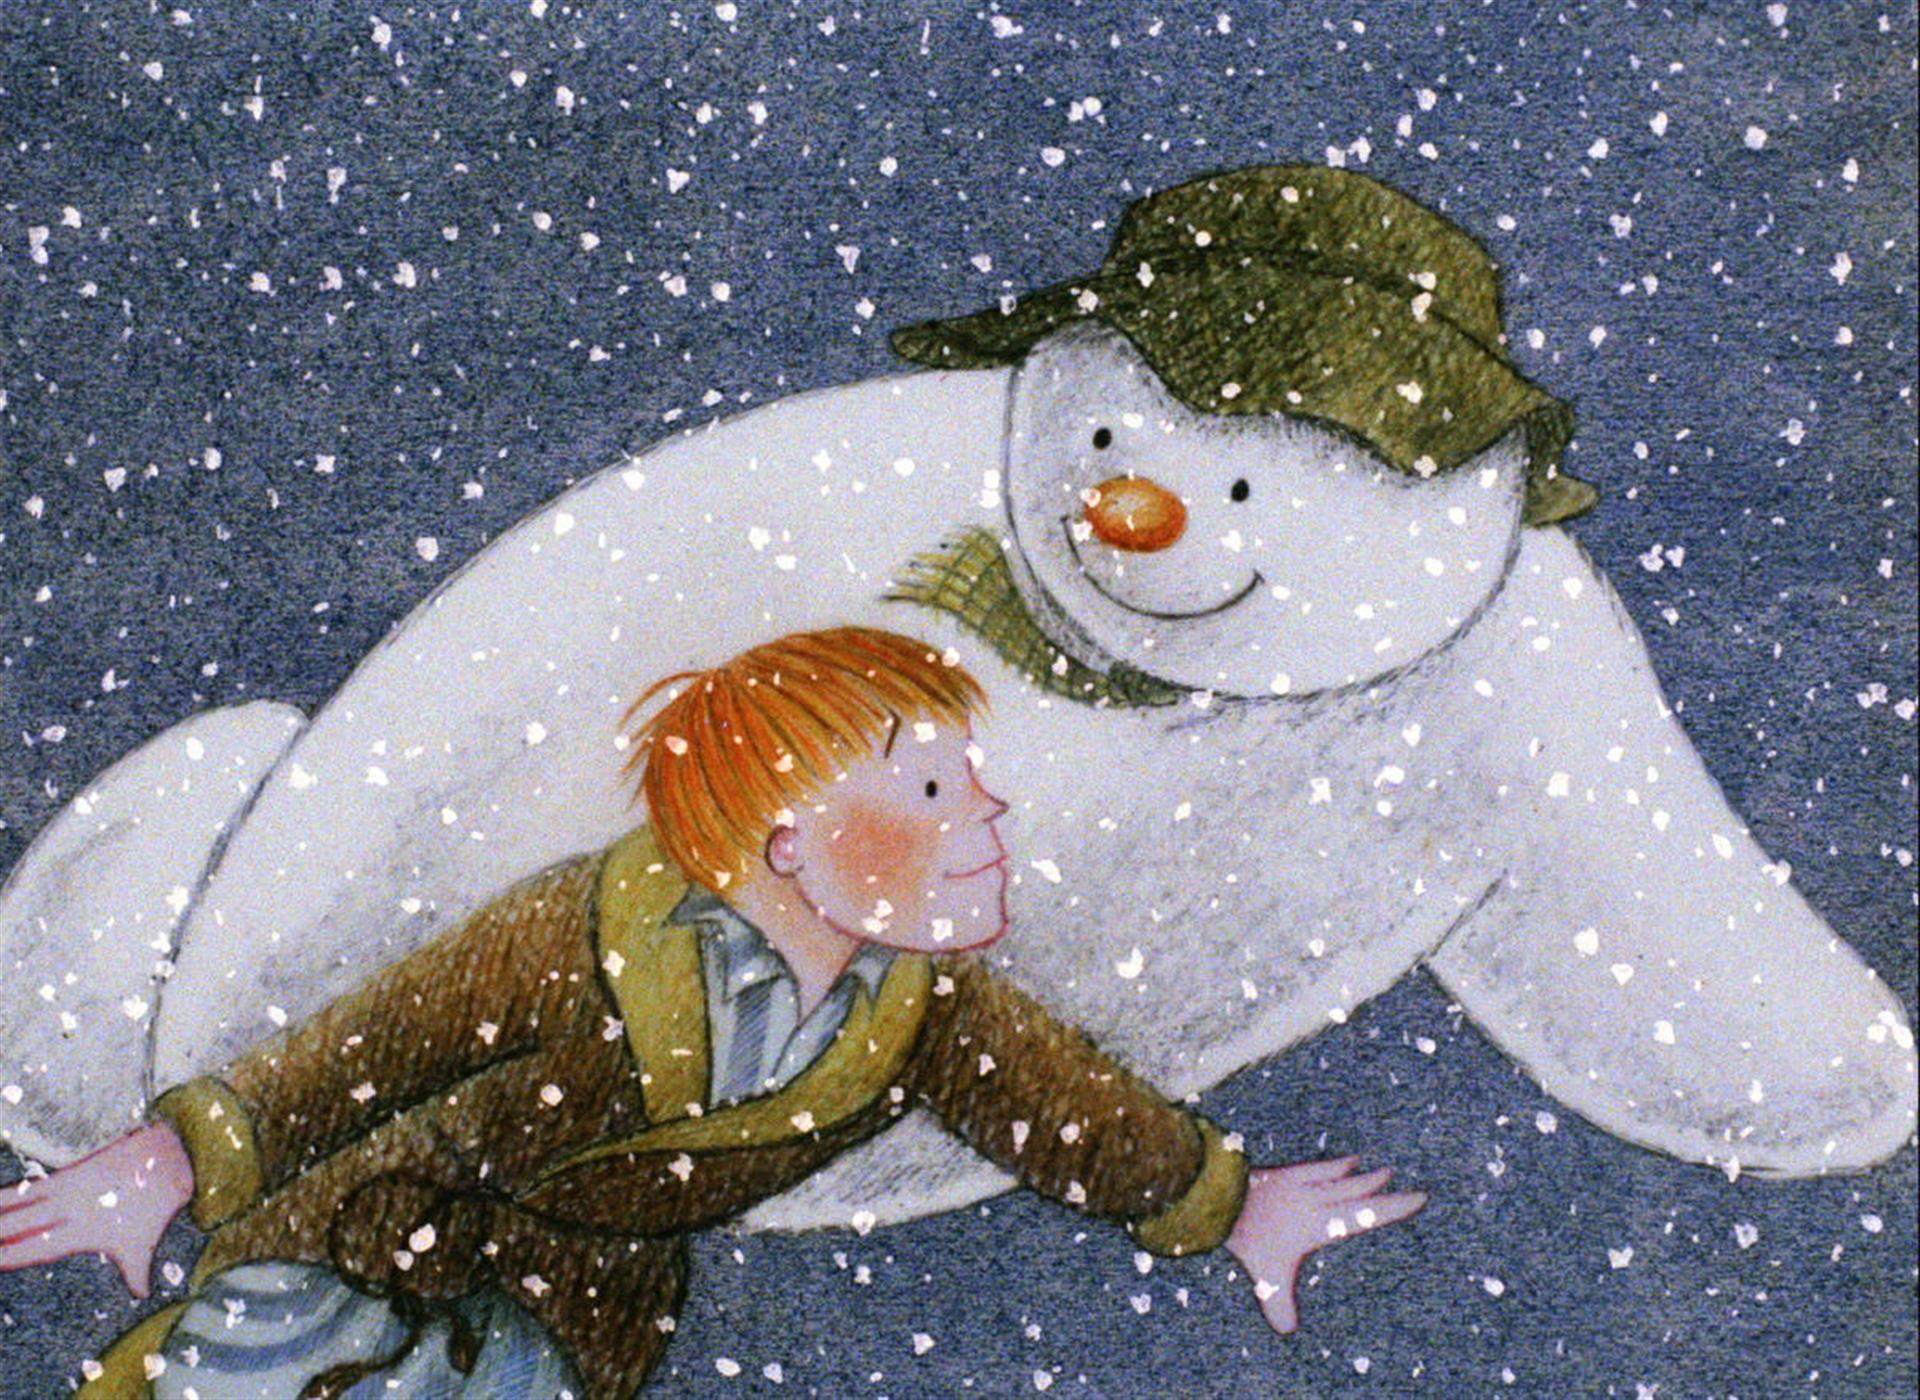 Lowther Cinema: The Snowman/ The Snowman & The Snowdog (U) - Lowther Pavilion